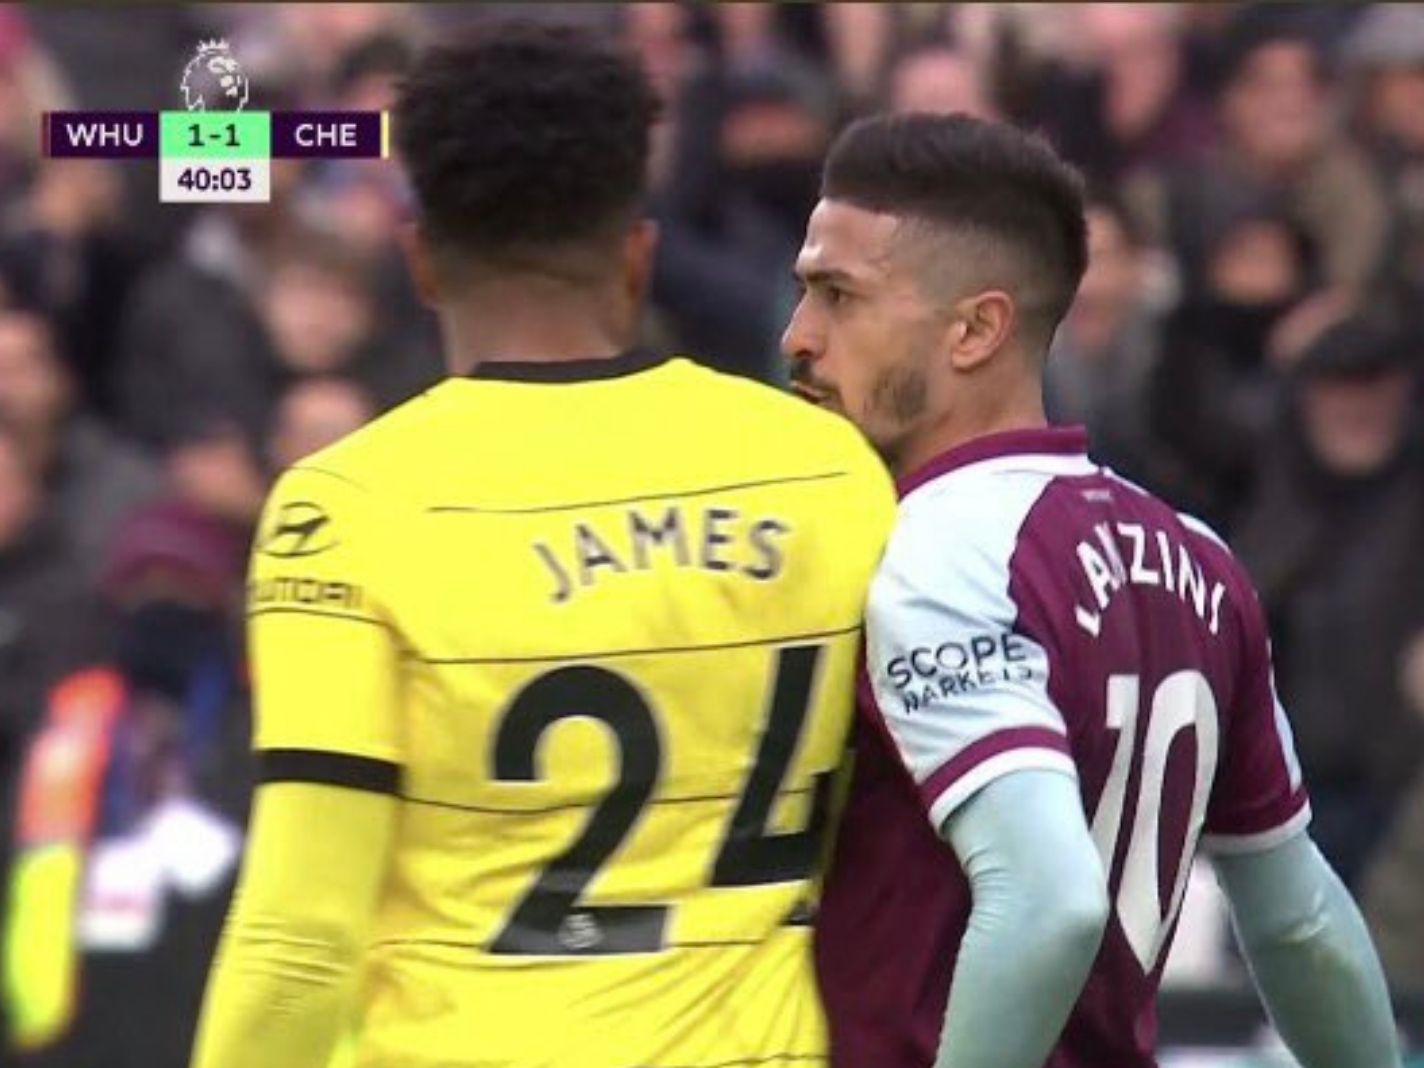 Reece James involved in a heated moment with Manuel Lanzini